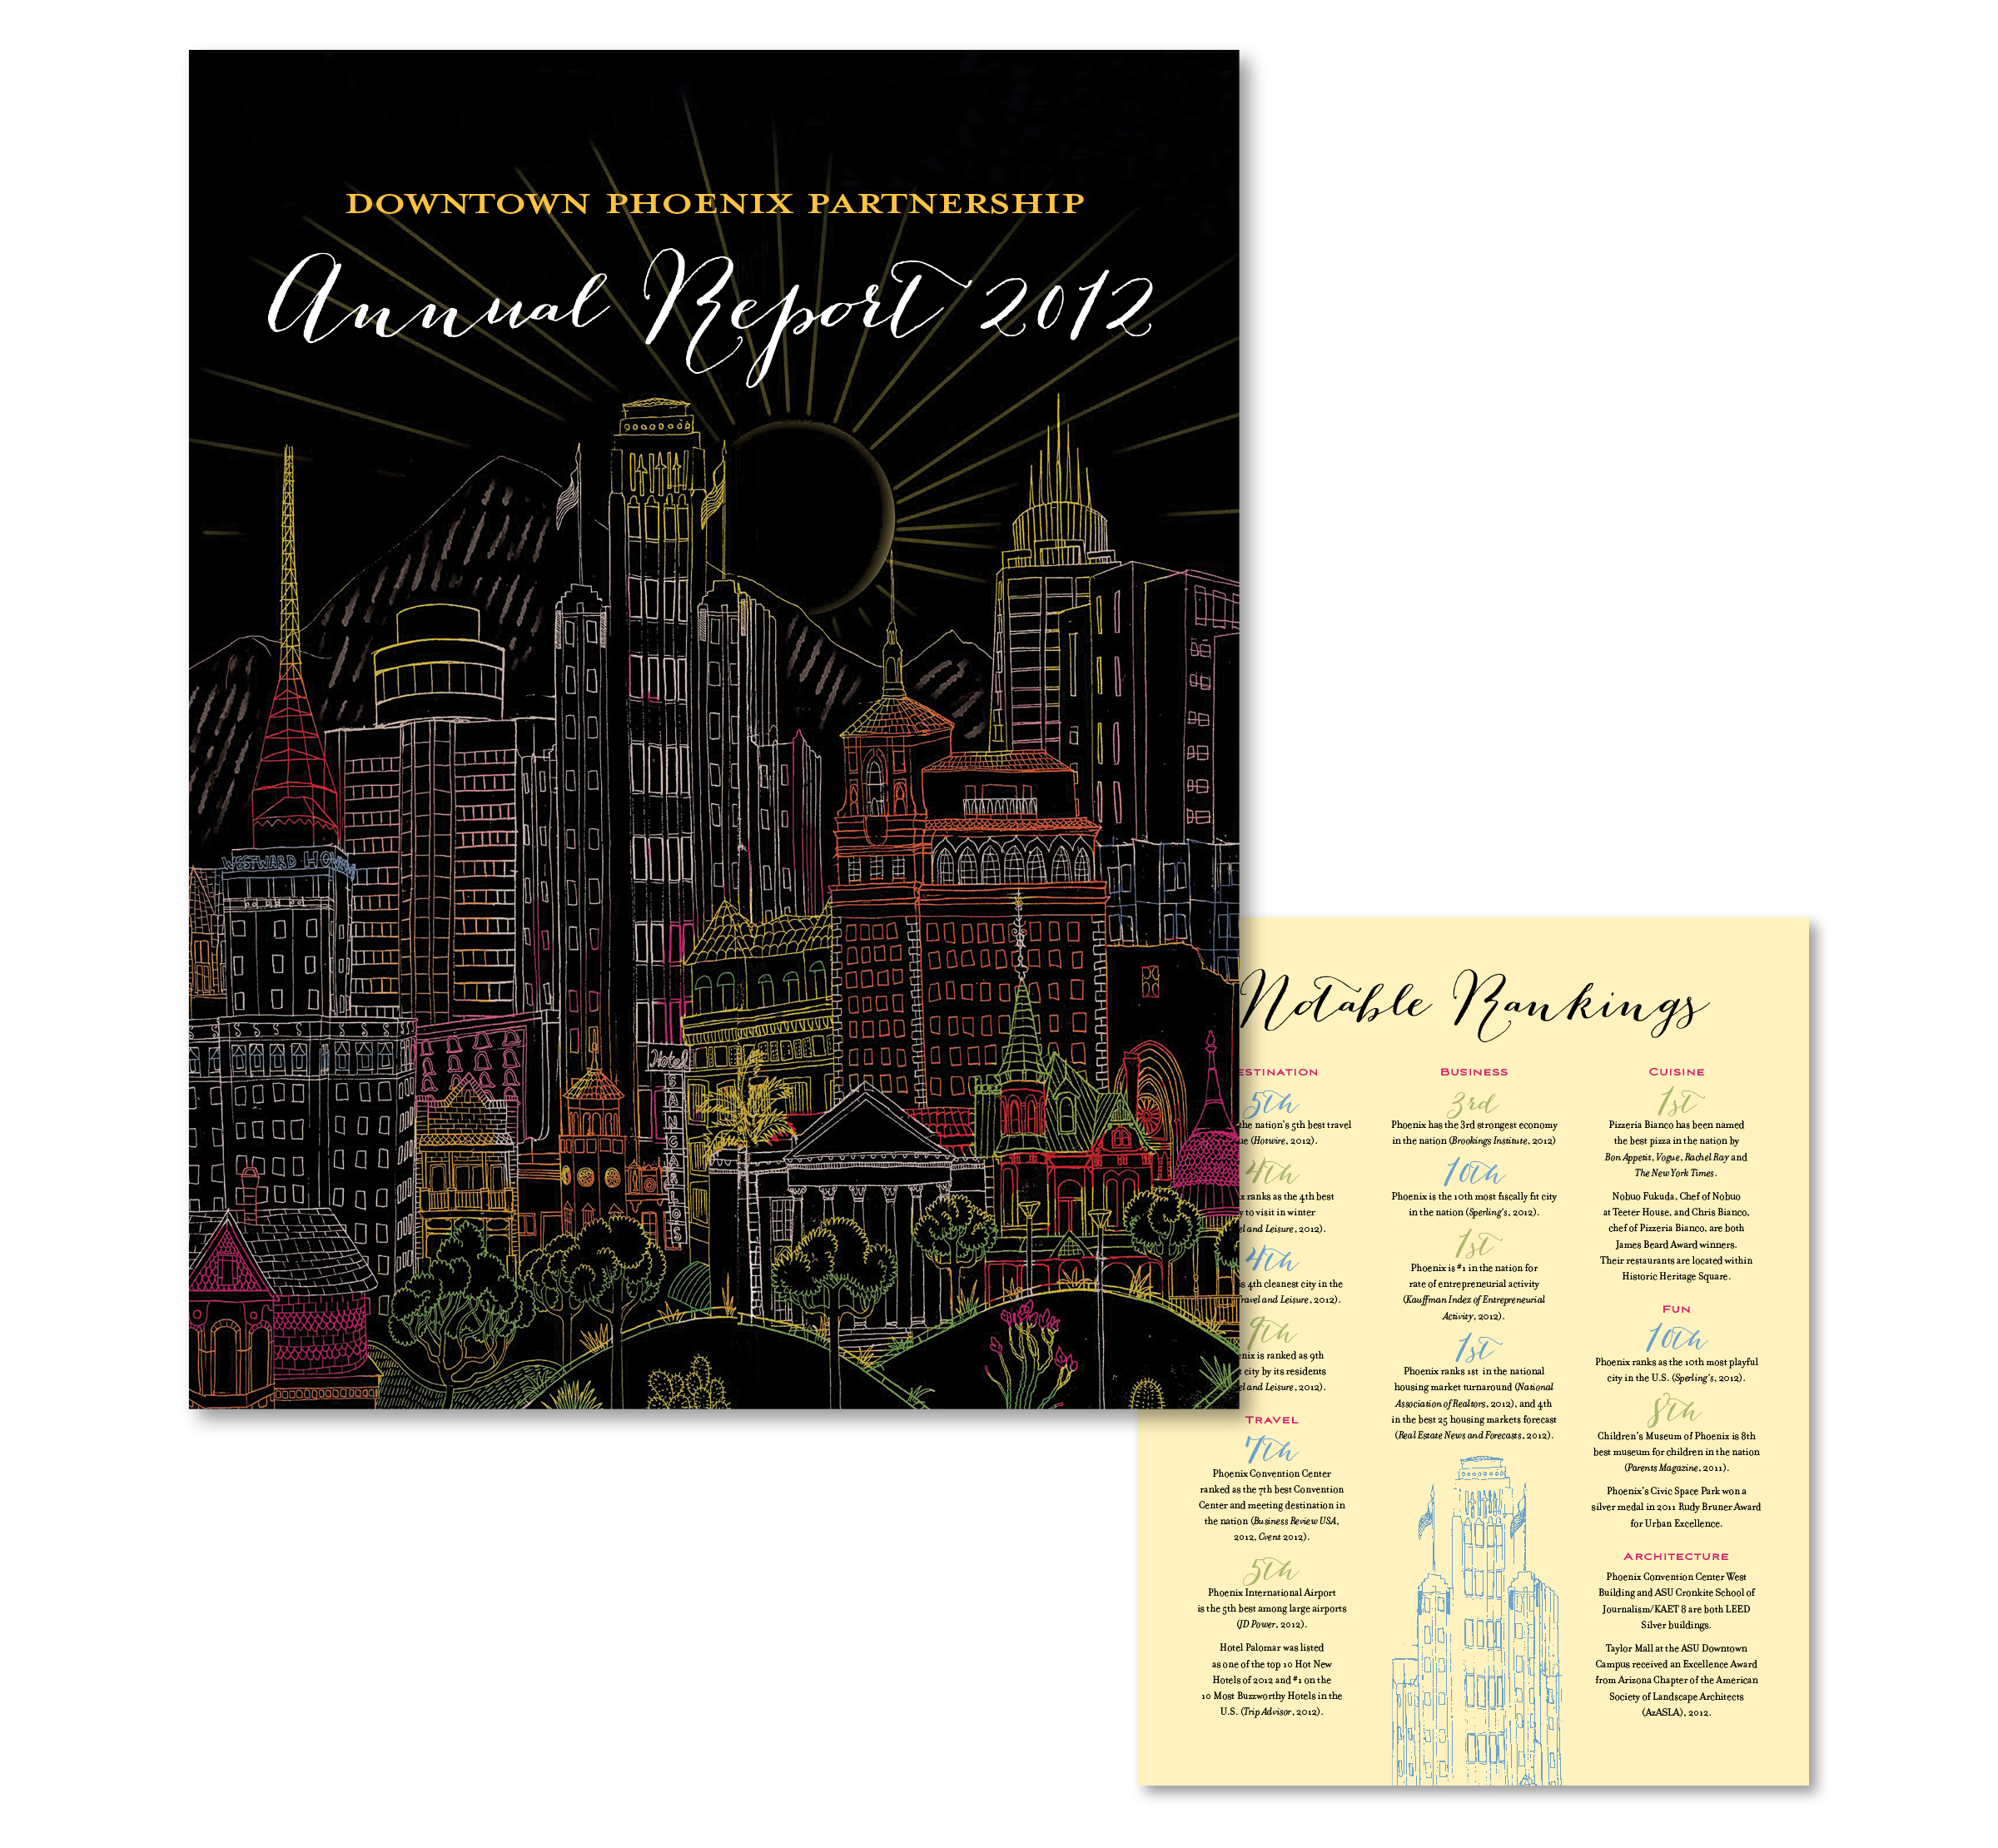  Business Improvement District Annual Report 